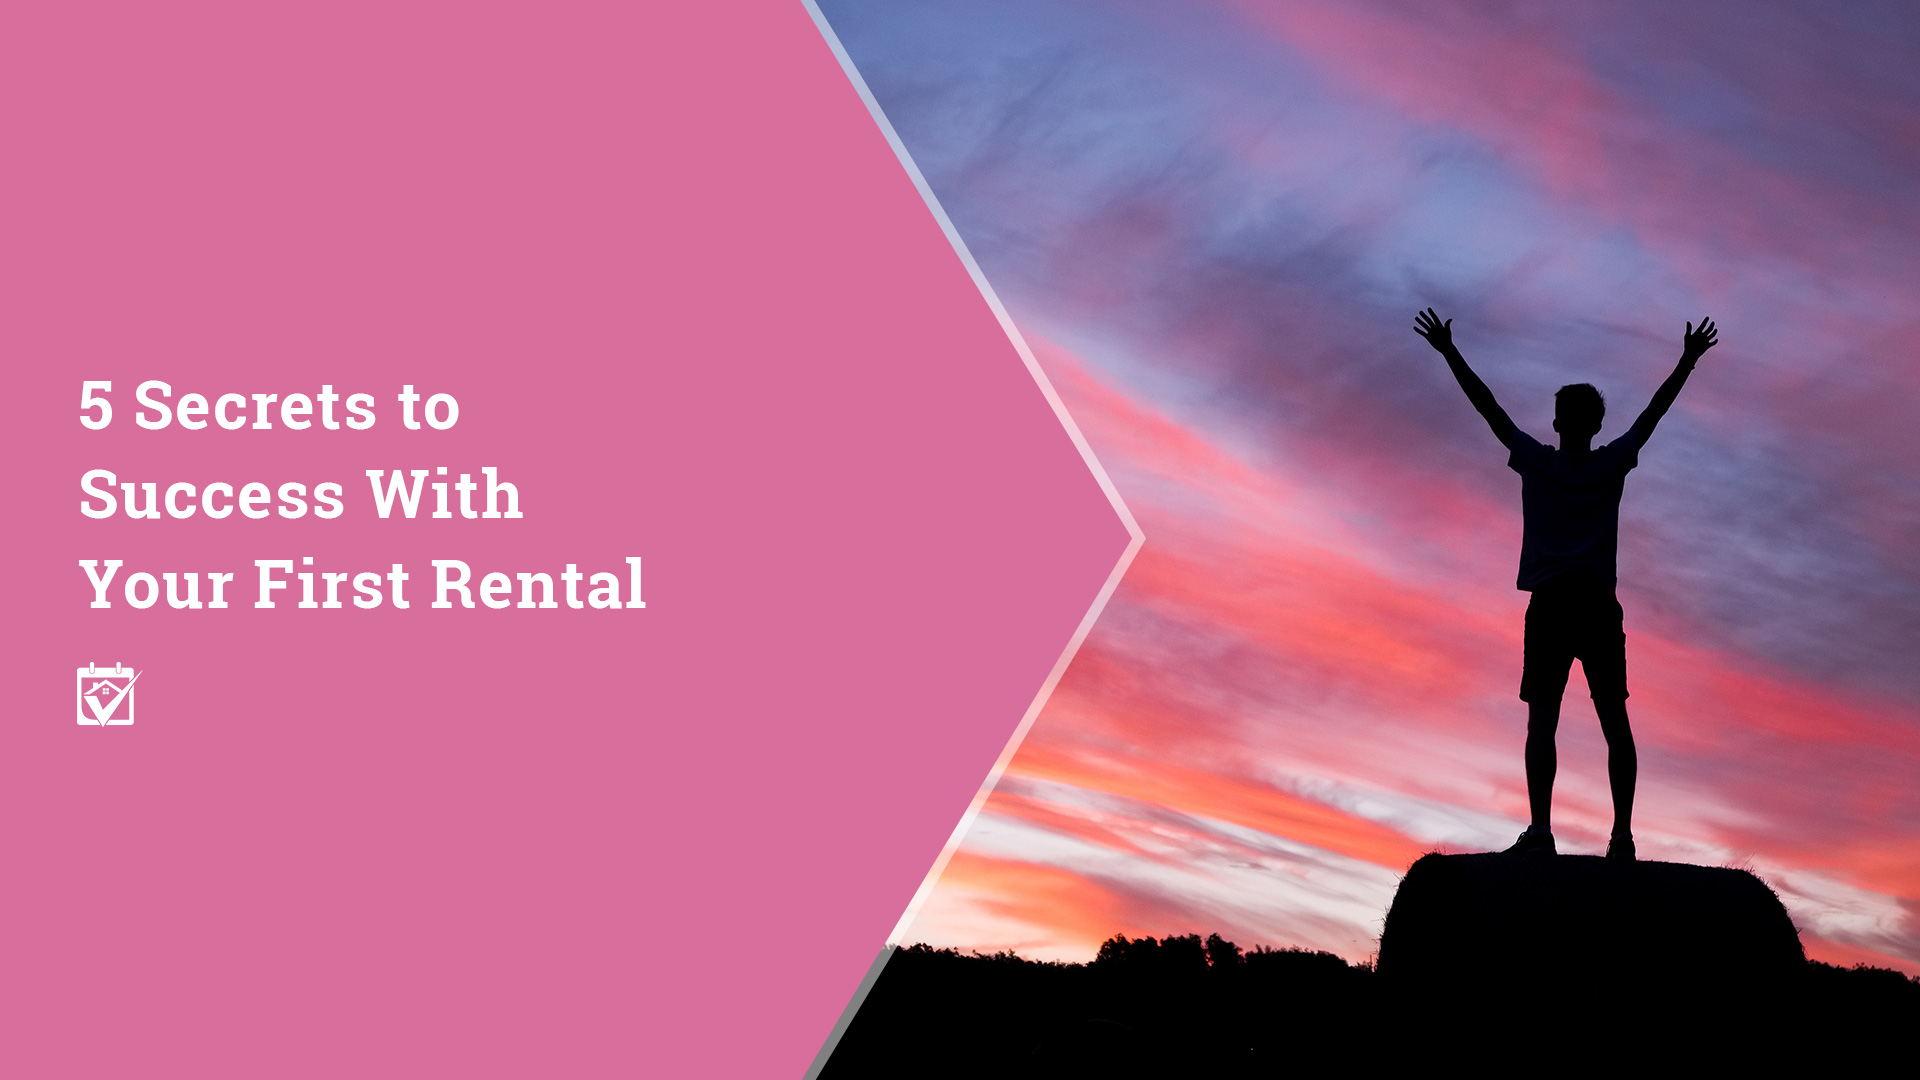  5 Secrets to Success With Your First Rental Property